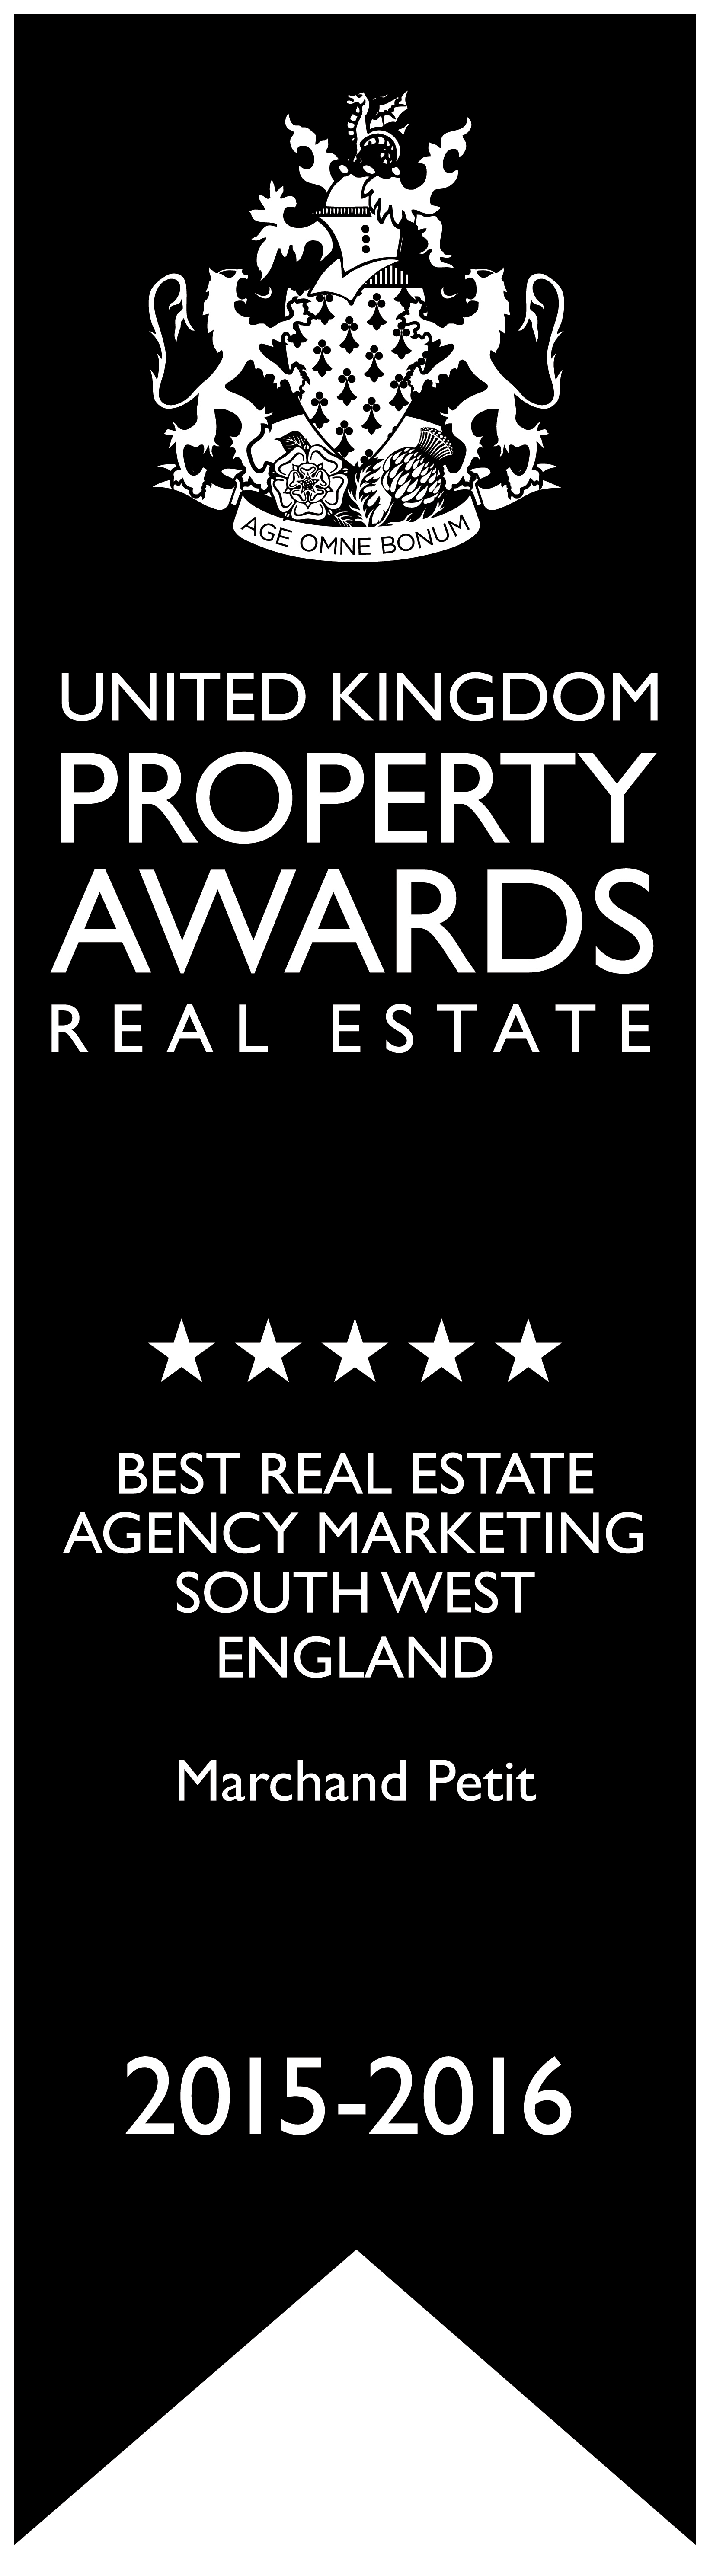 Best real estate agency marketing, South West England